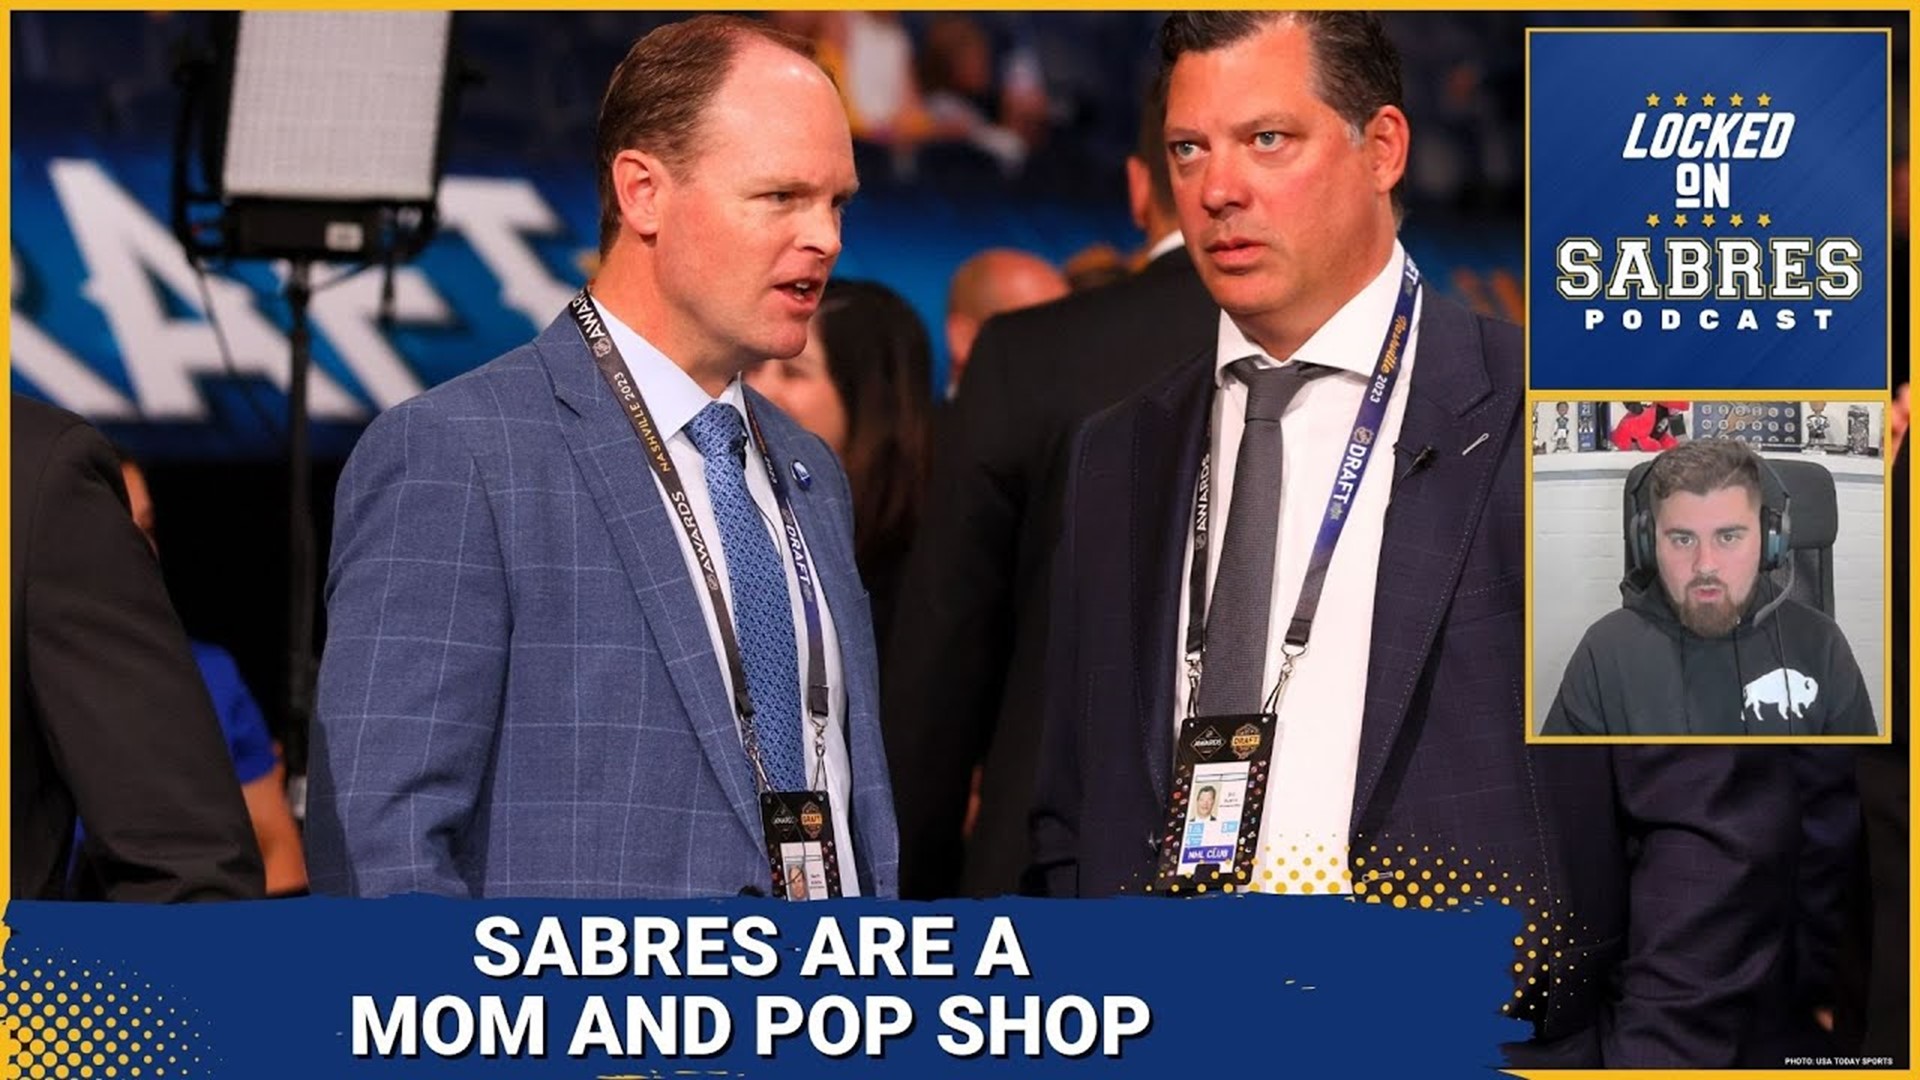 The Sabres are run like a mom and pop shop